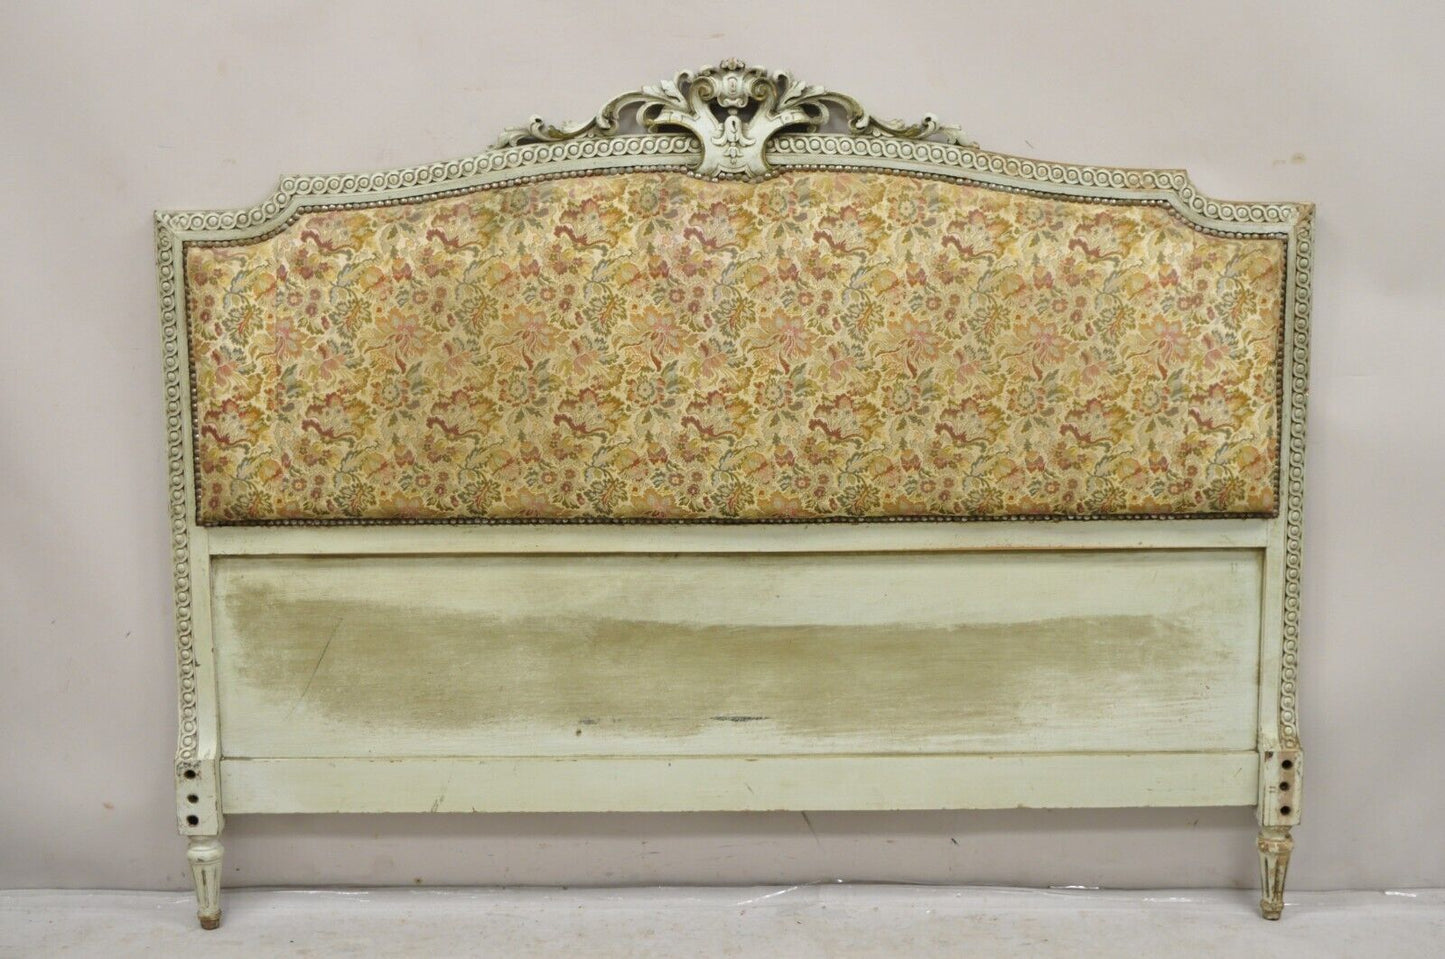 Antique French Louis XVI Style Distressed Green Queen Upholstered Bed Headboard